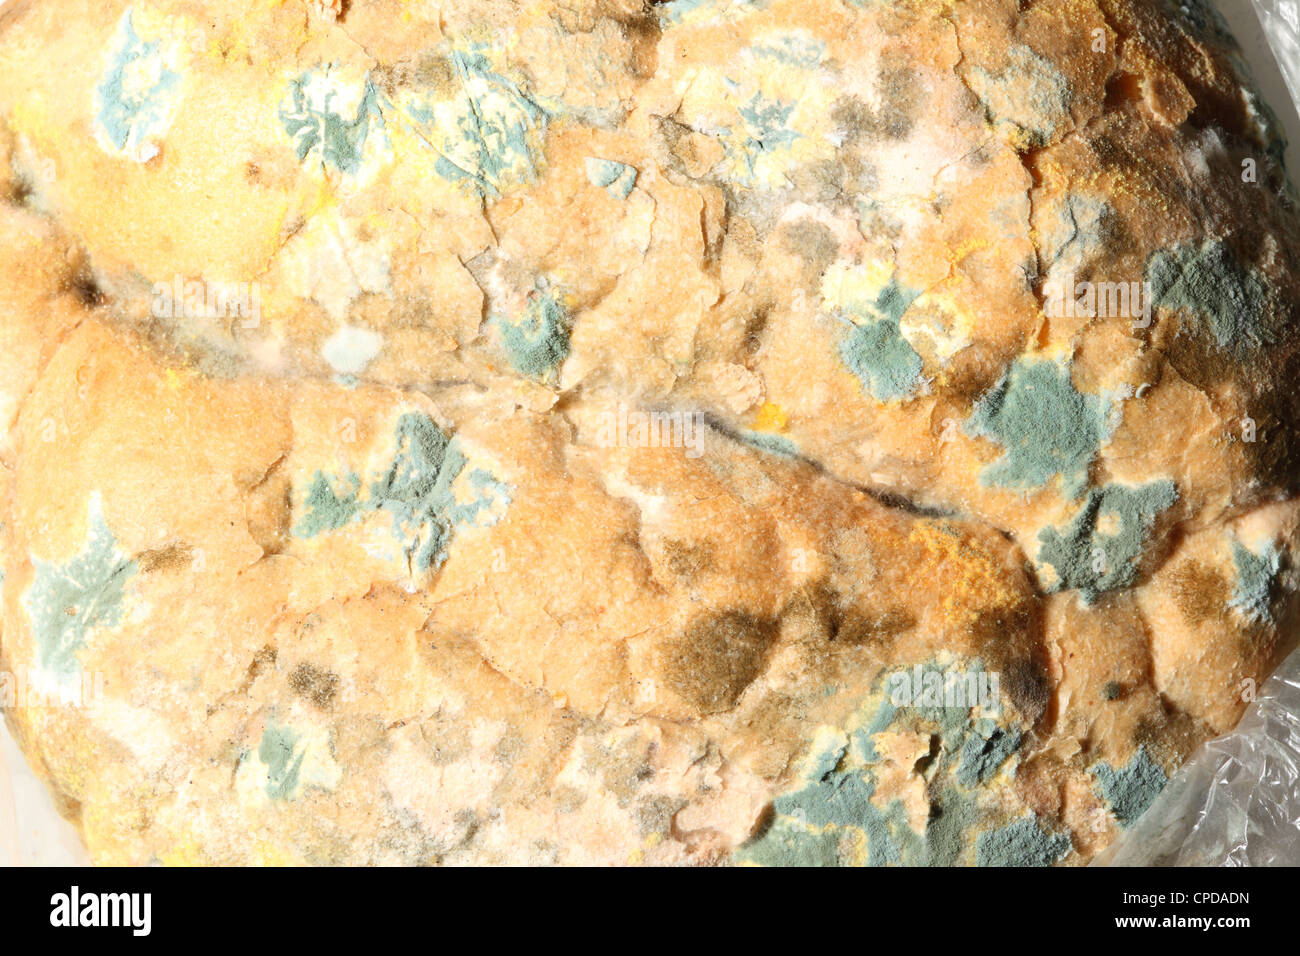 Mould growing old bread nobody texture background Stock Photo